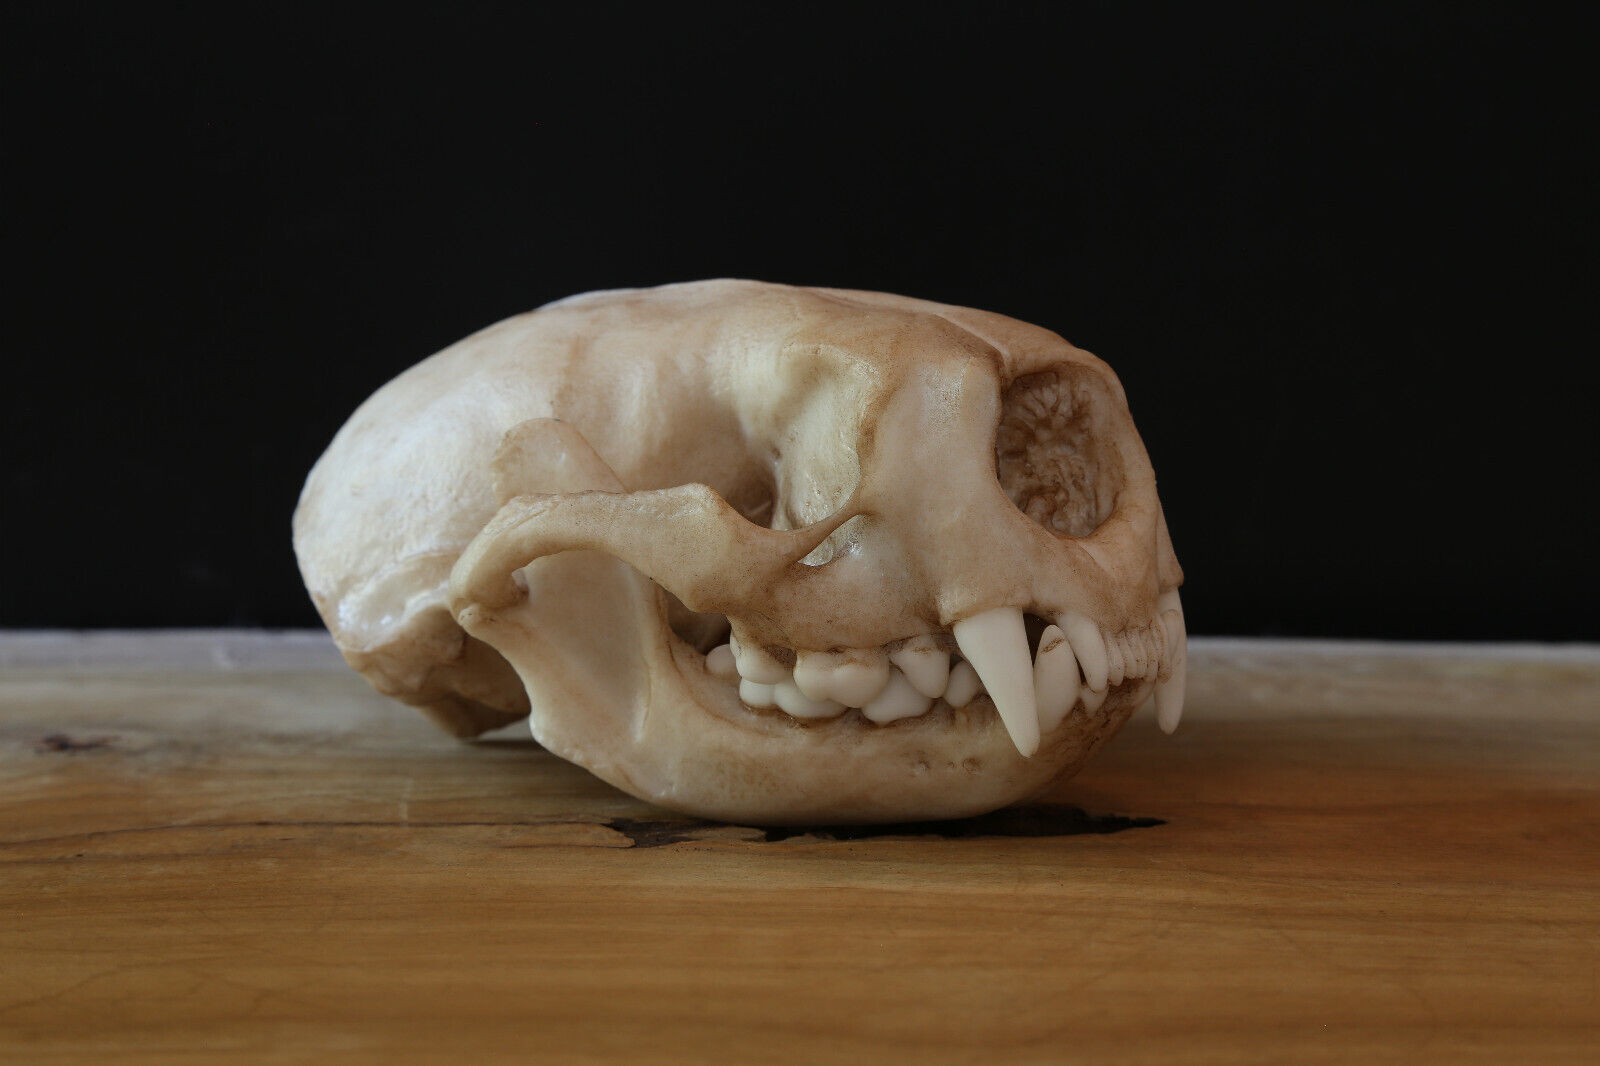 Sea Otter Life Sized Skull-Replica - High Quality Piece-FREE World Wide Shipping